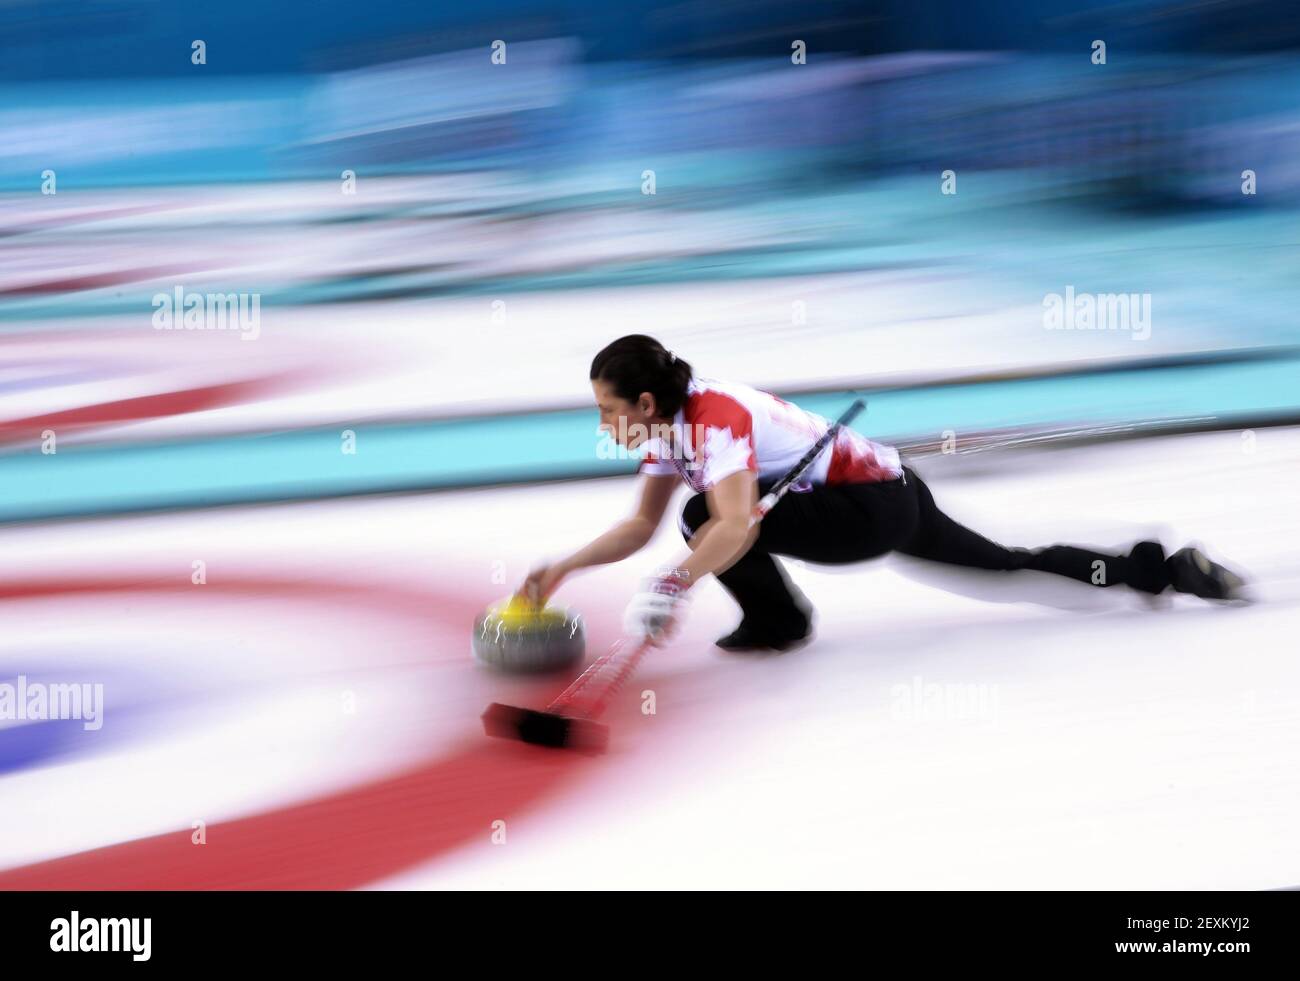 Canada's Jill Officer throws against Great Britain during women's curling semifinals at the Ice Cube Curling Center during the Winter Olympics in Sochi, Russia, Wednesday, Feb. 19, 2014. (Photo by Brian Cassella/Chicago Tribune/MCT/Sipa USA) Stock Photo